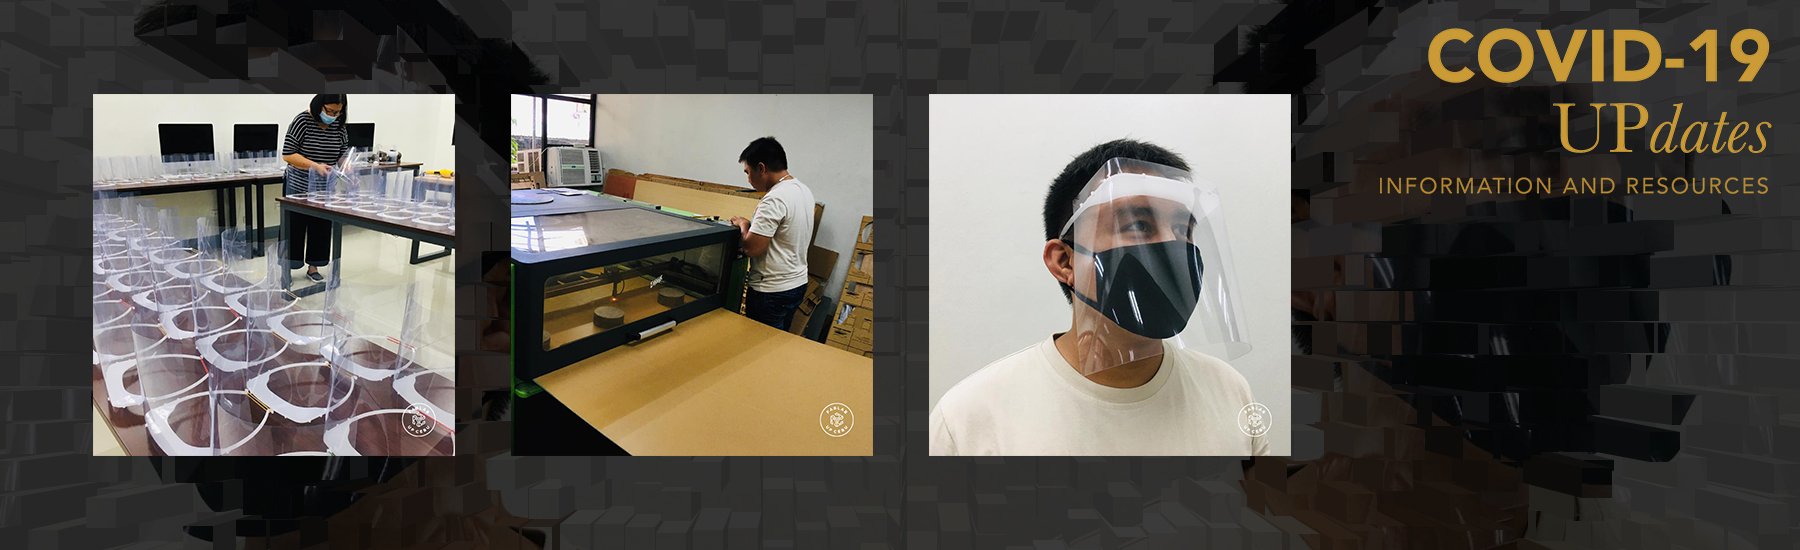 UP Cebu FabLab creates face shields for frontliners against COVID-19